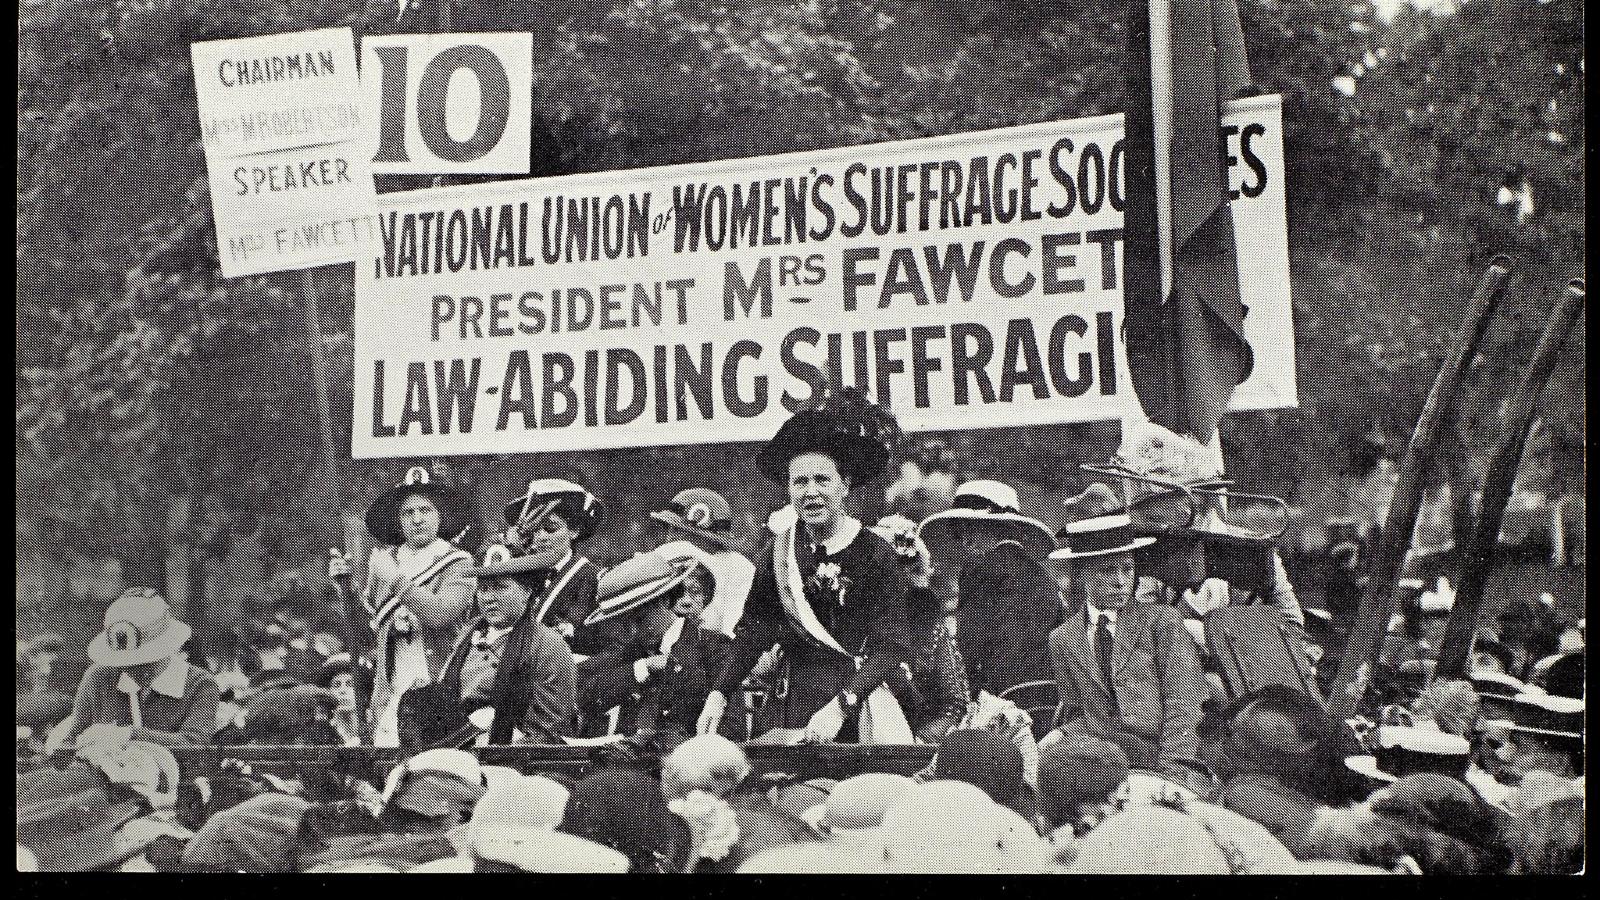 A group of people with banners and placards at a protest looking into the camera. One of them is Millicent Garrett Fawcett who is speaking at this protest as indicated by the banner above her head.